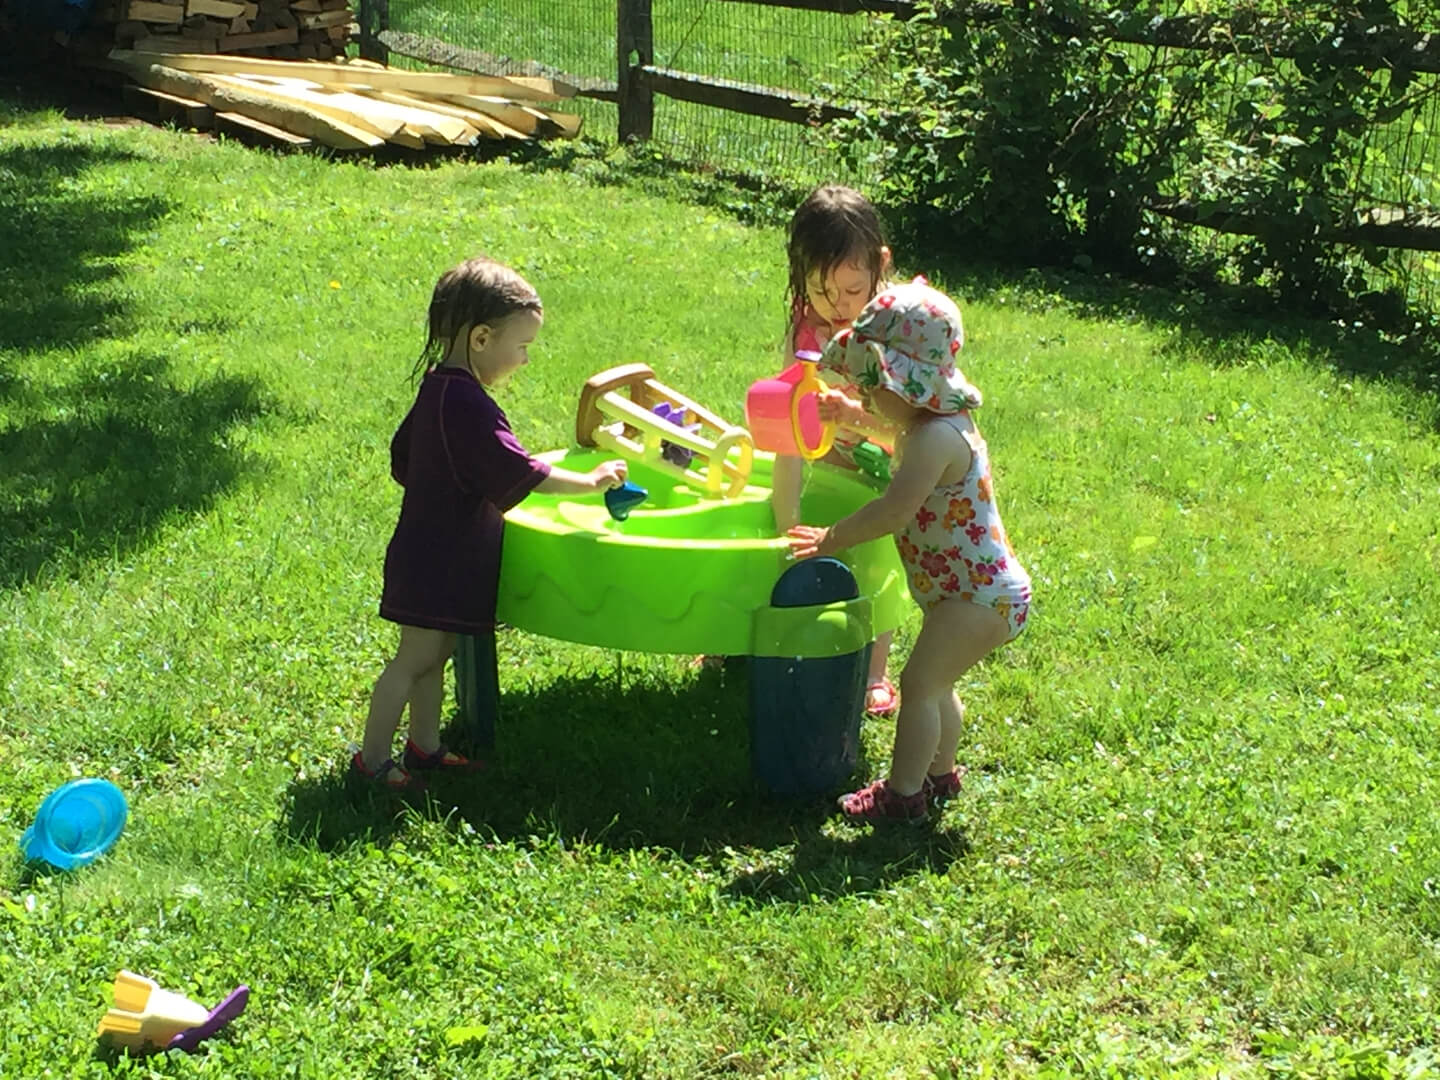 Three kids playing with toys in the yard